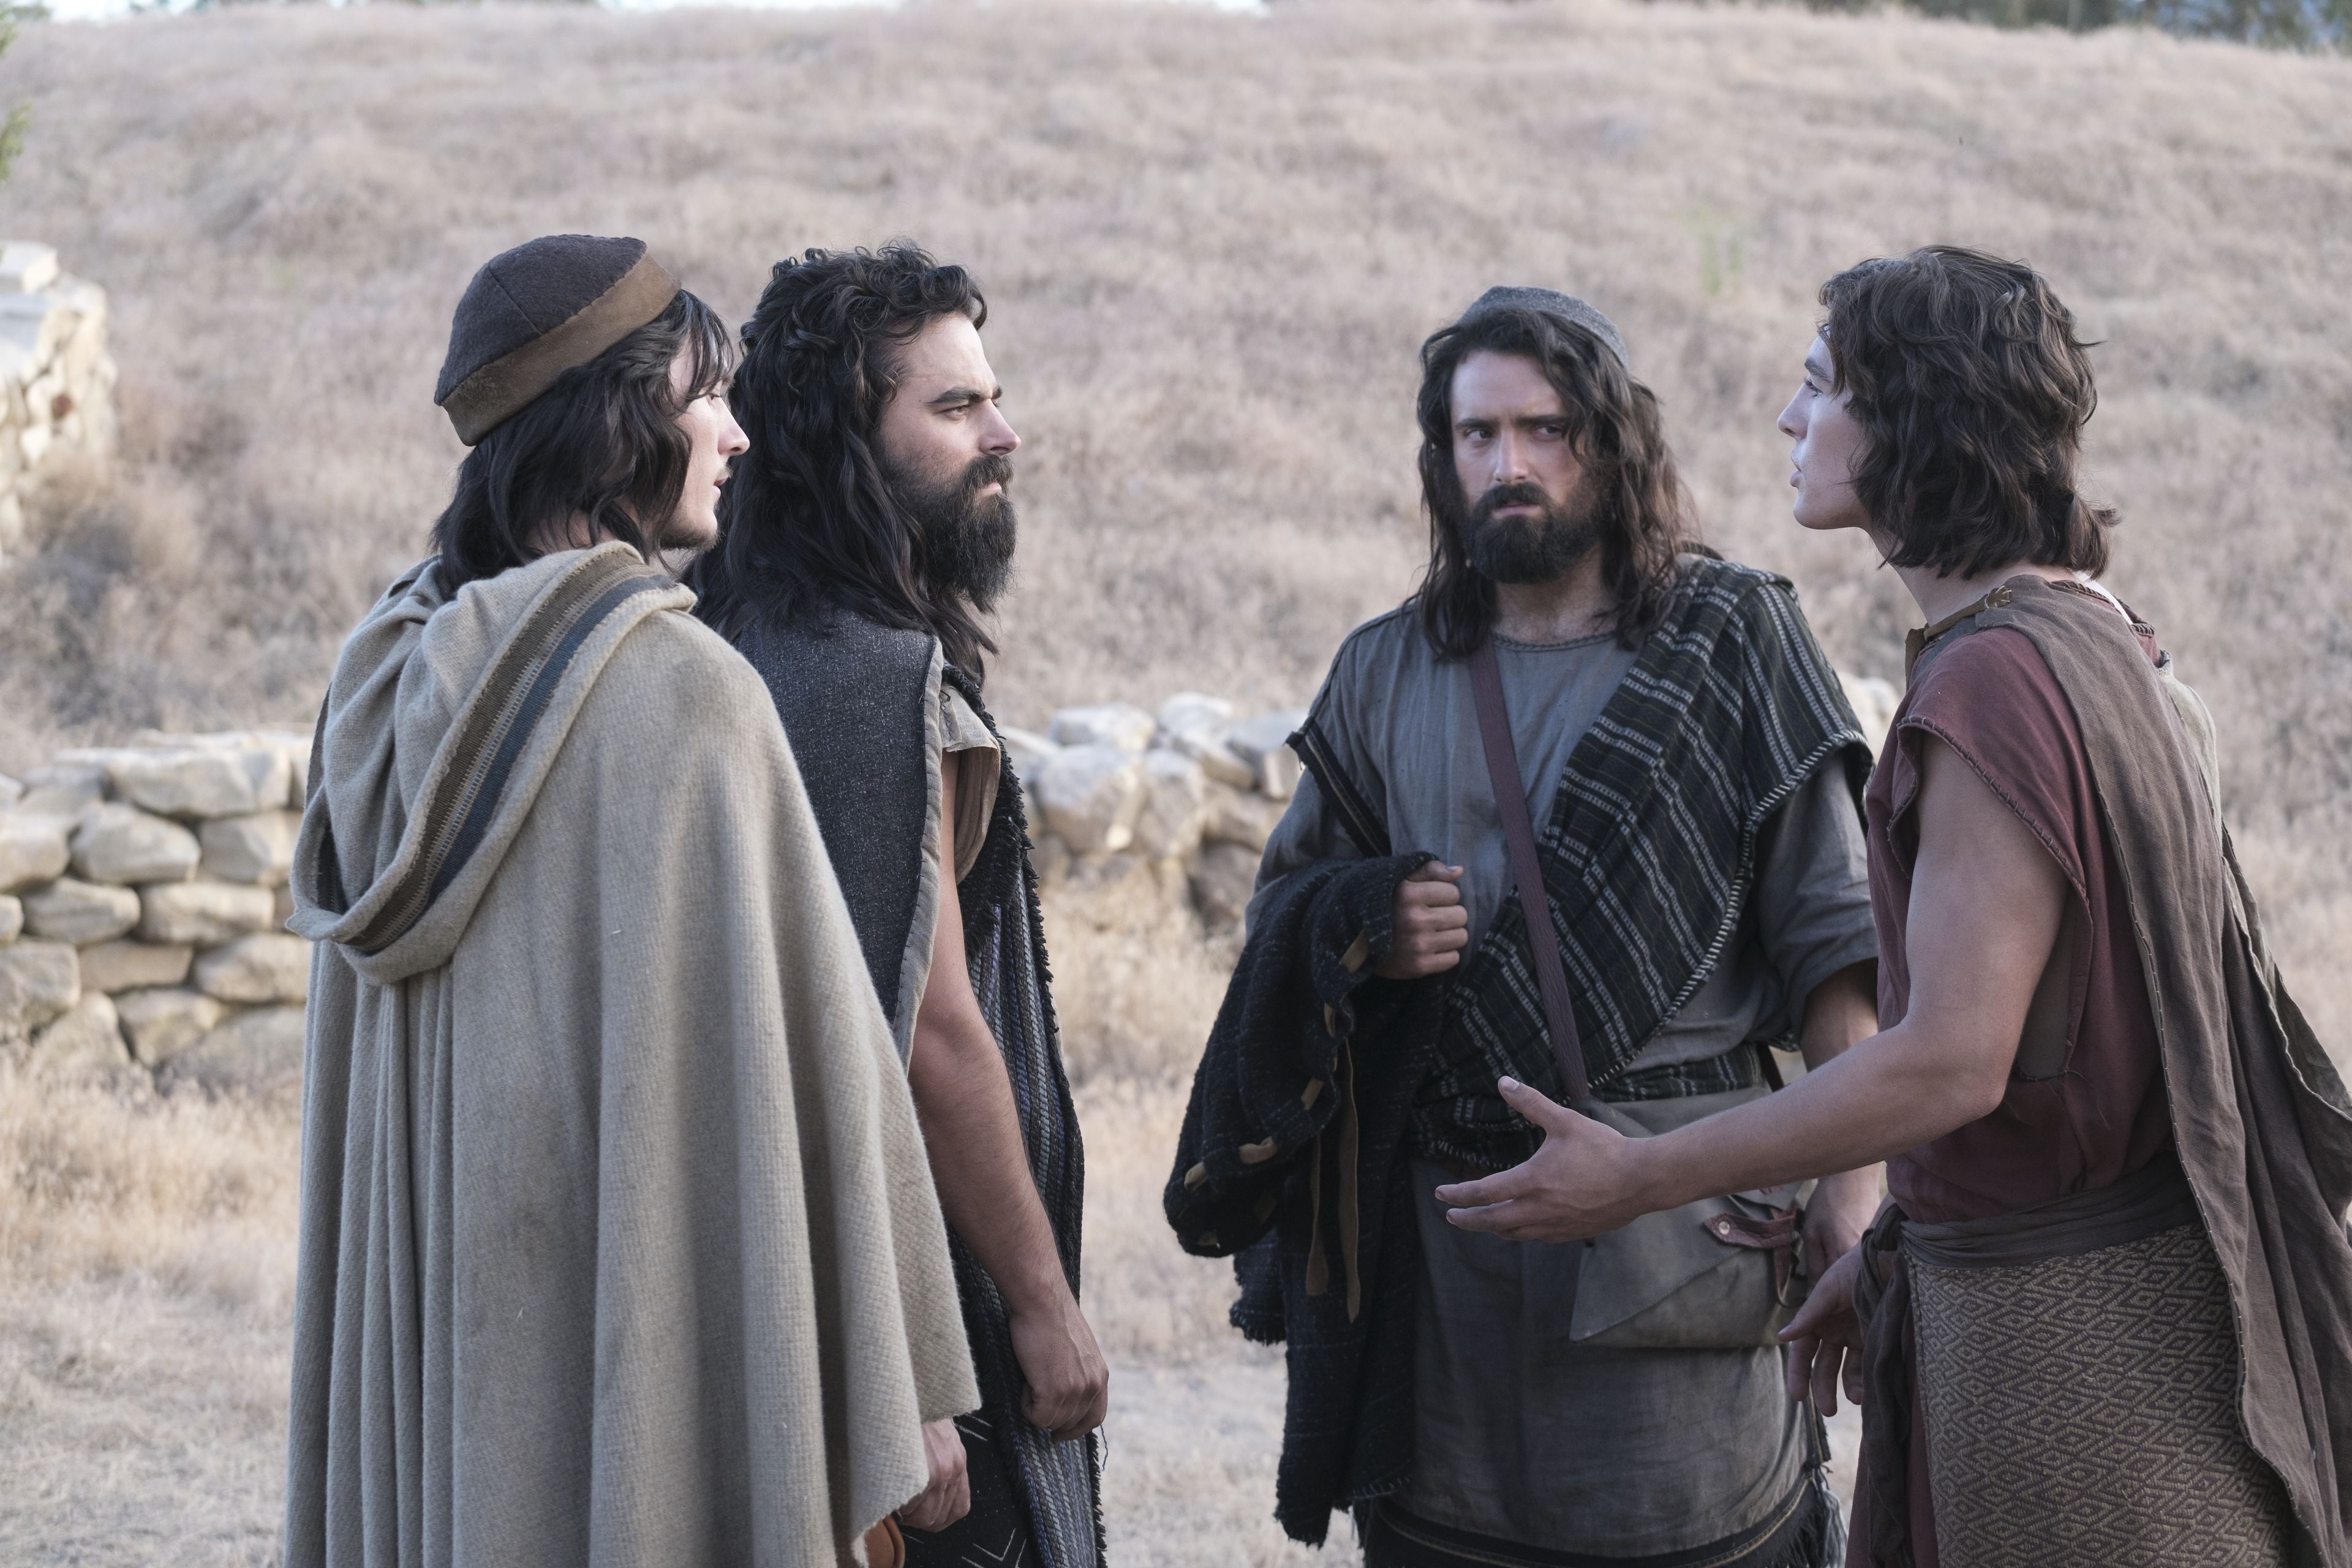 Nephi and his brothers discuss how to approach Laban.